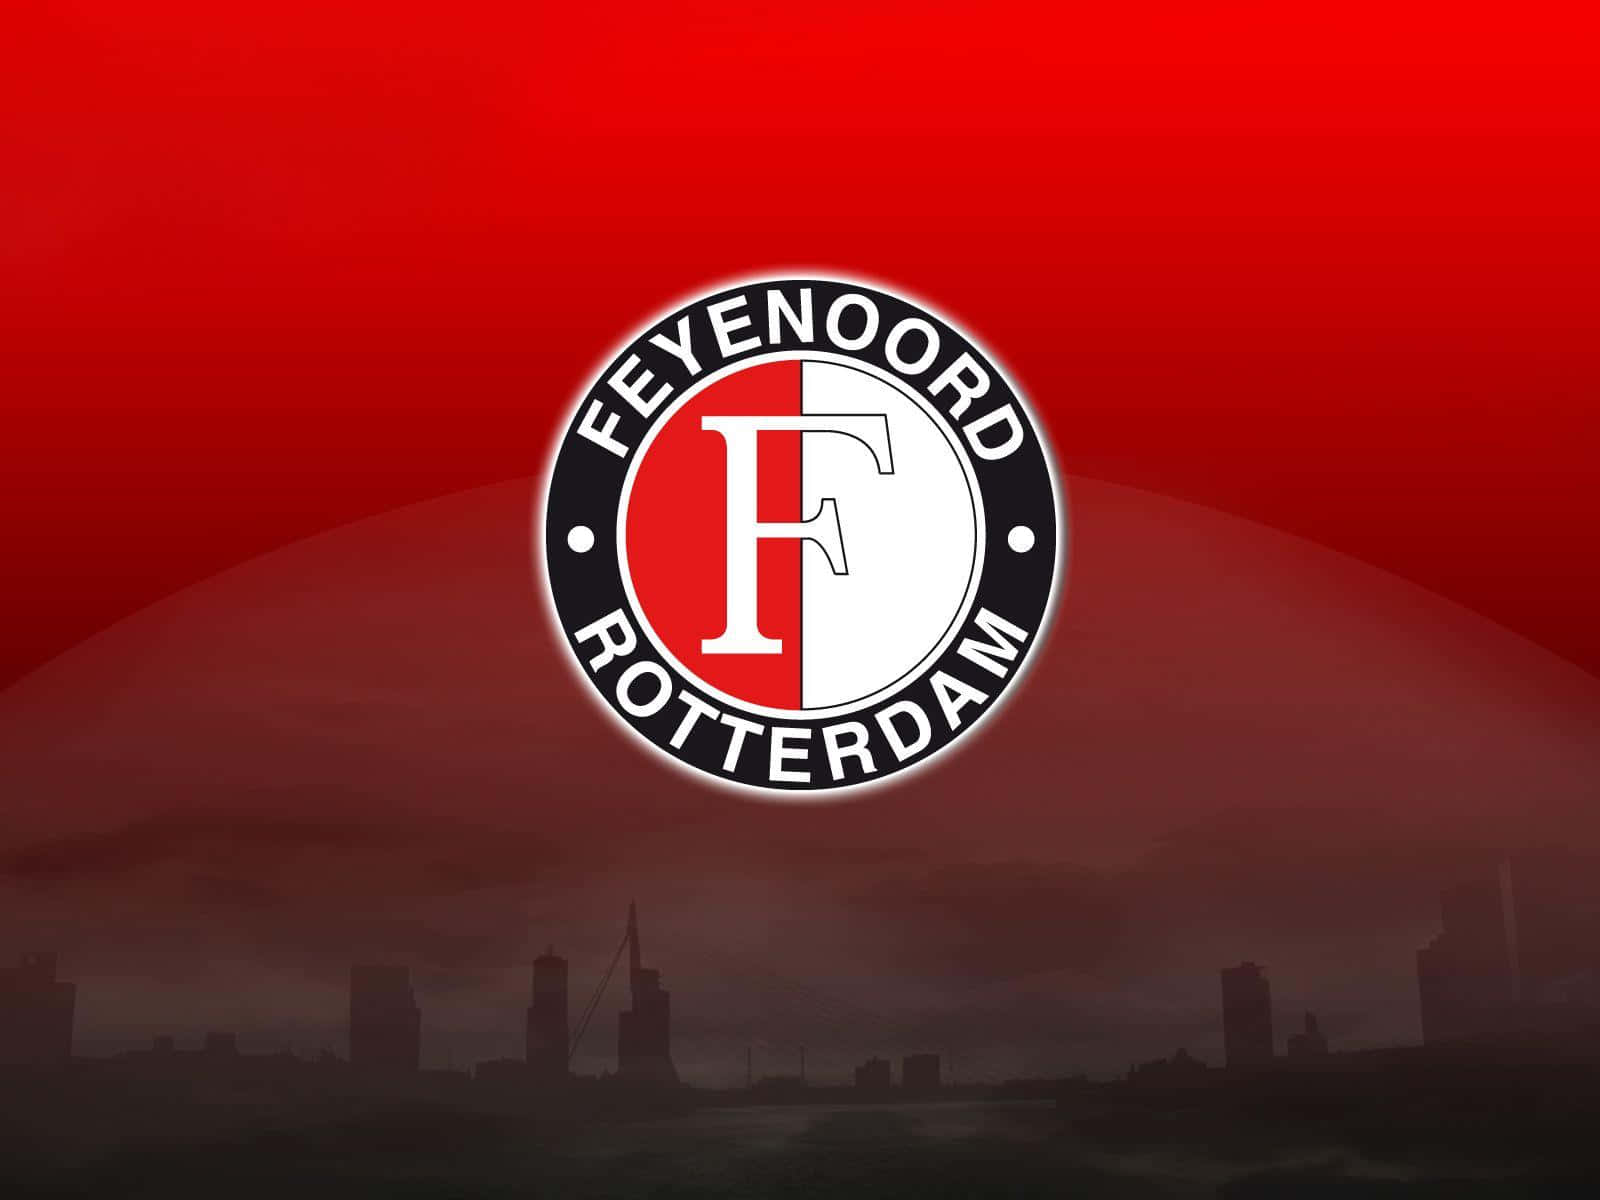 The Fans of Feyenoord Make The Stadium Come Alive Wallpaper